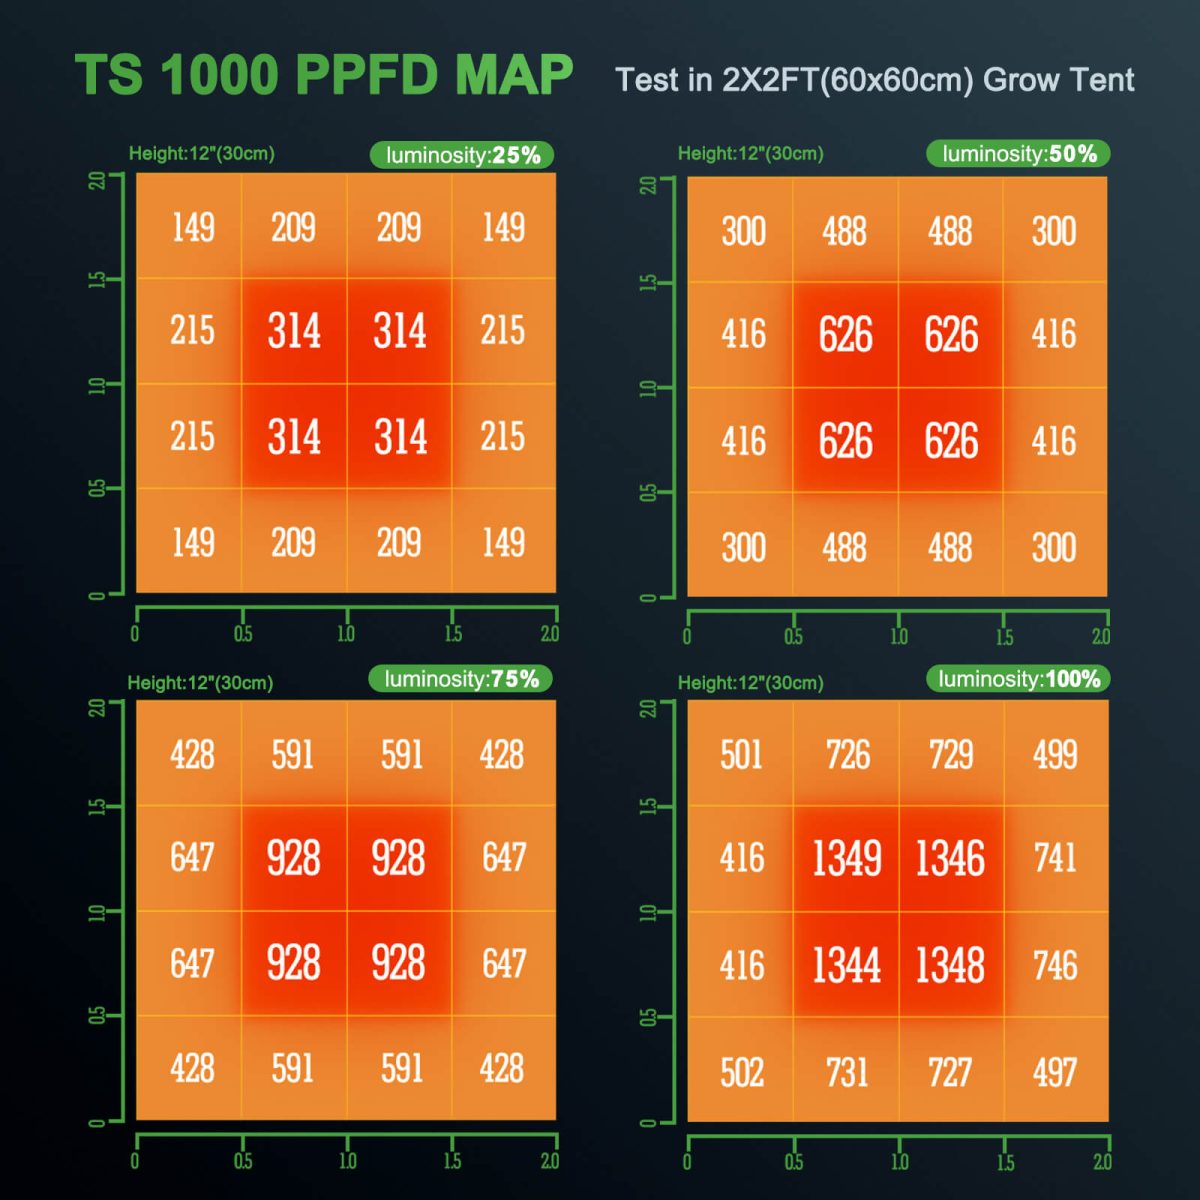 High PPFD map of TS 1000 led grow light at different luminosity 25%, 50% 75% power